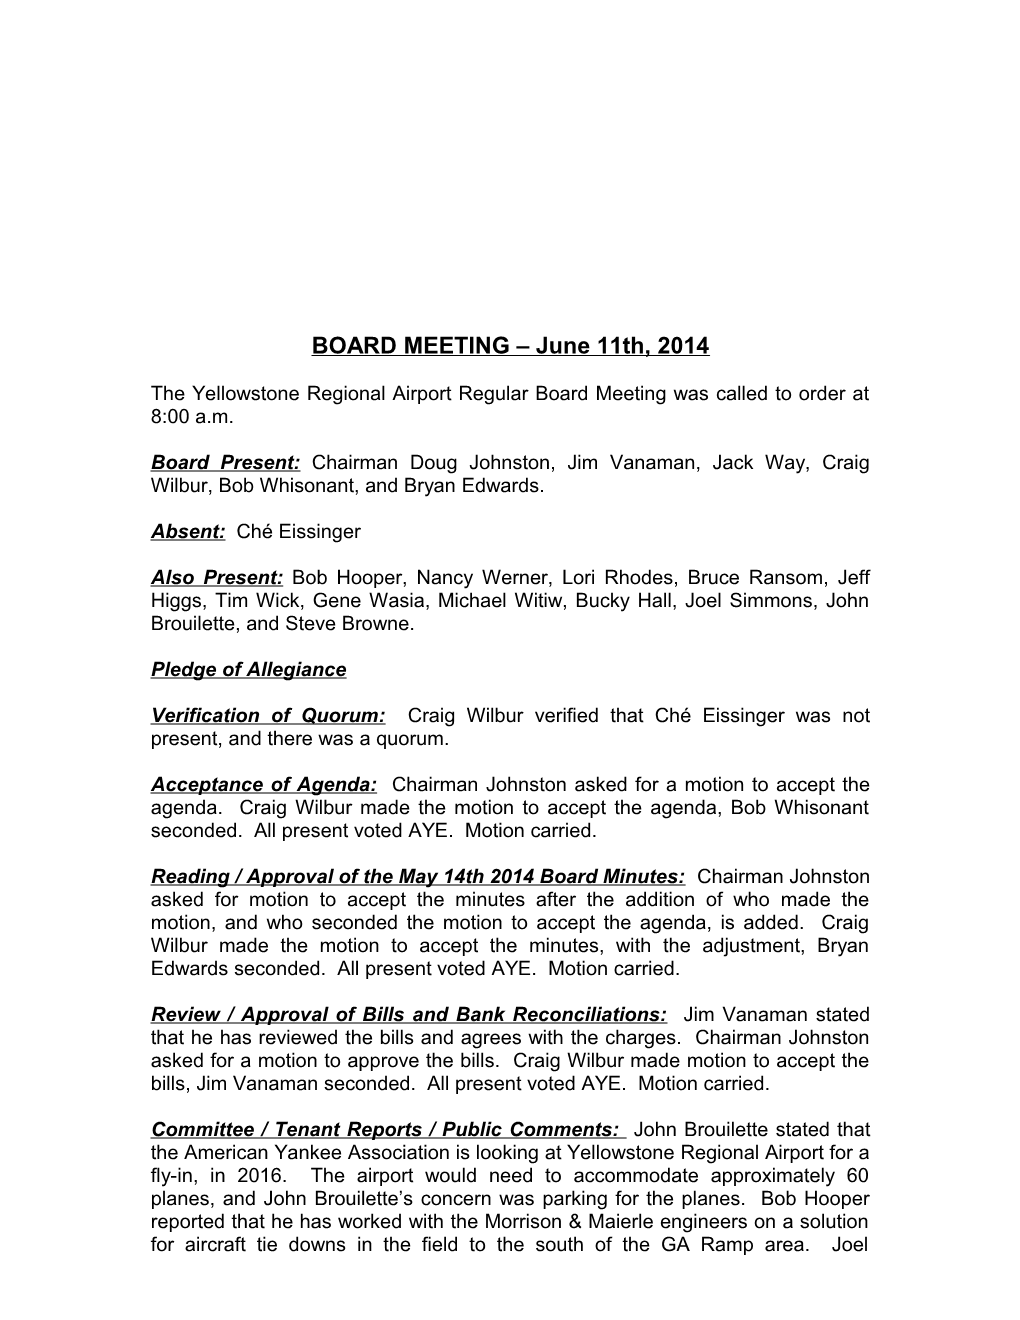 The Yellowstone Regional Airport Regular Board Meeting Was Called to Order at 8:00 A.M